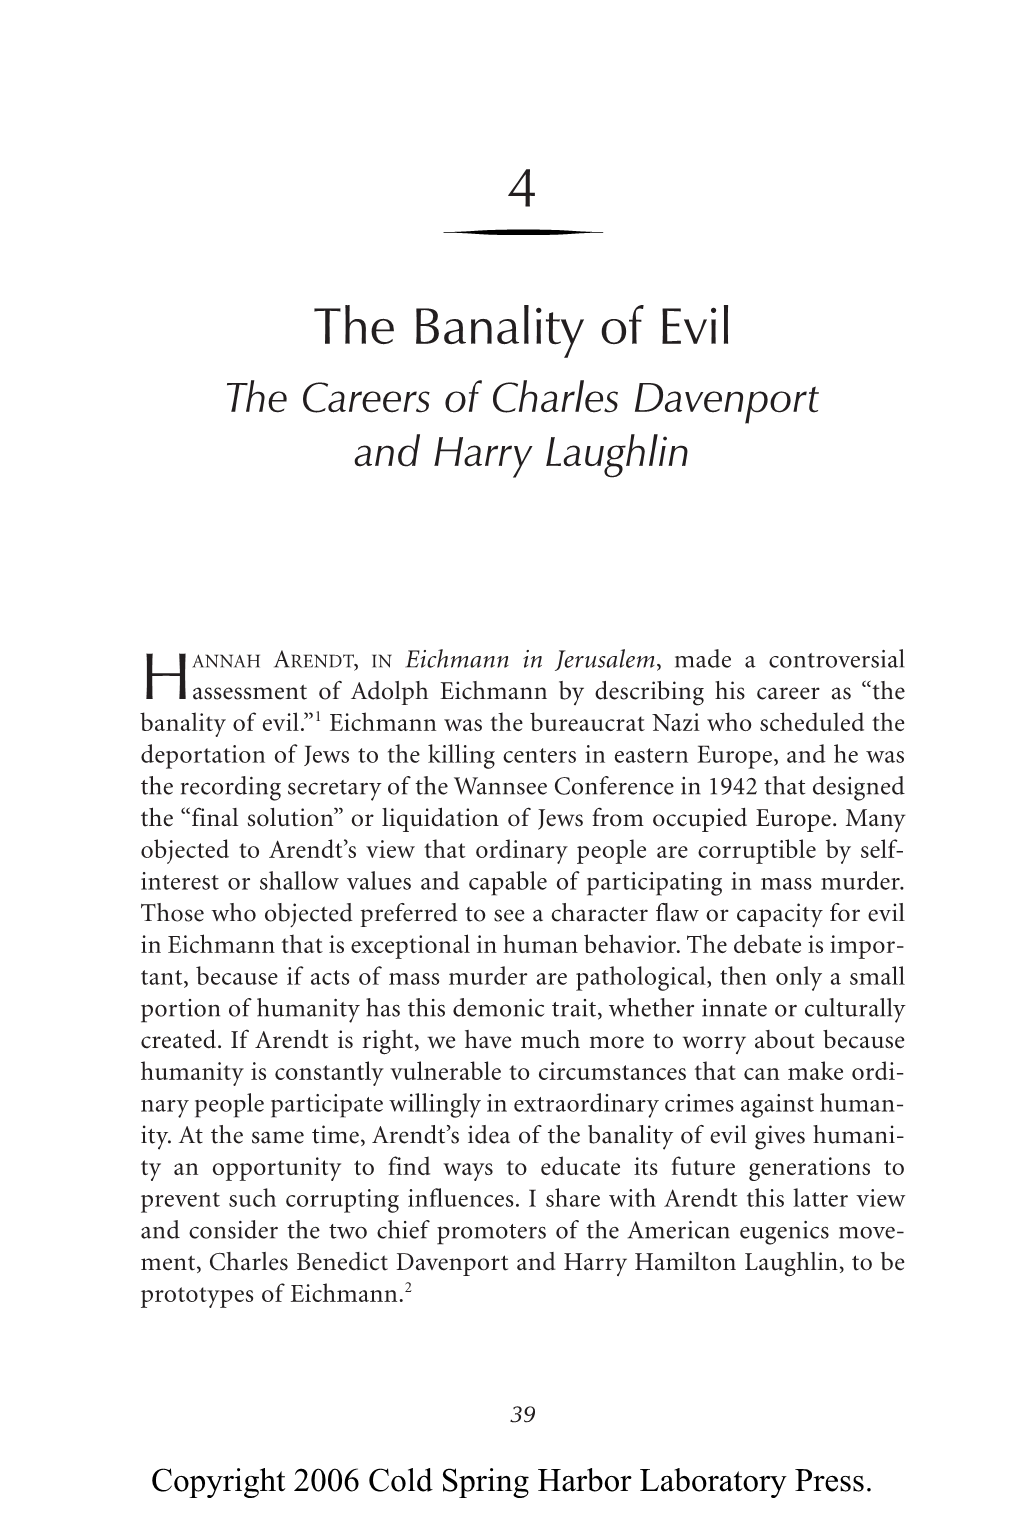 The Banality of Evil the Careers of Charles Davenport and Harry Laughlin